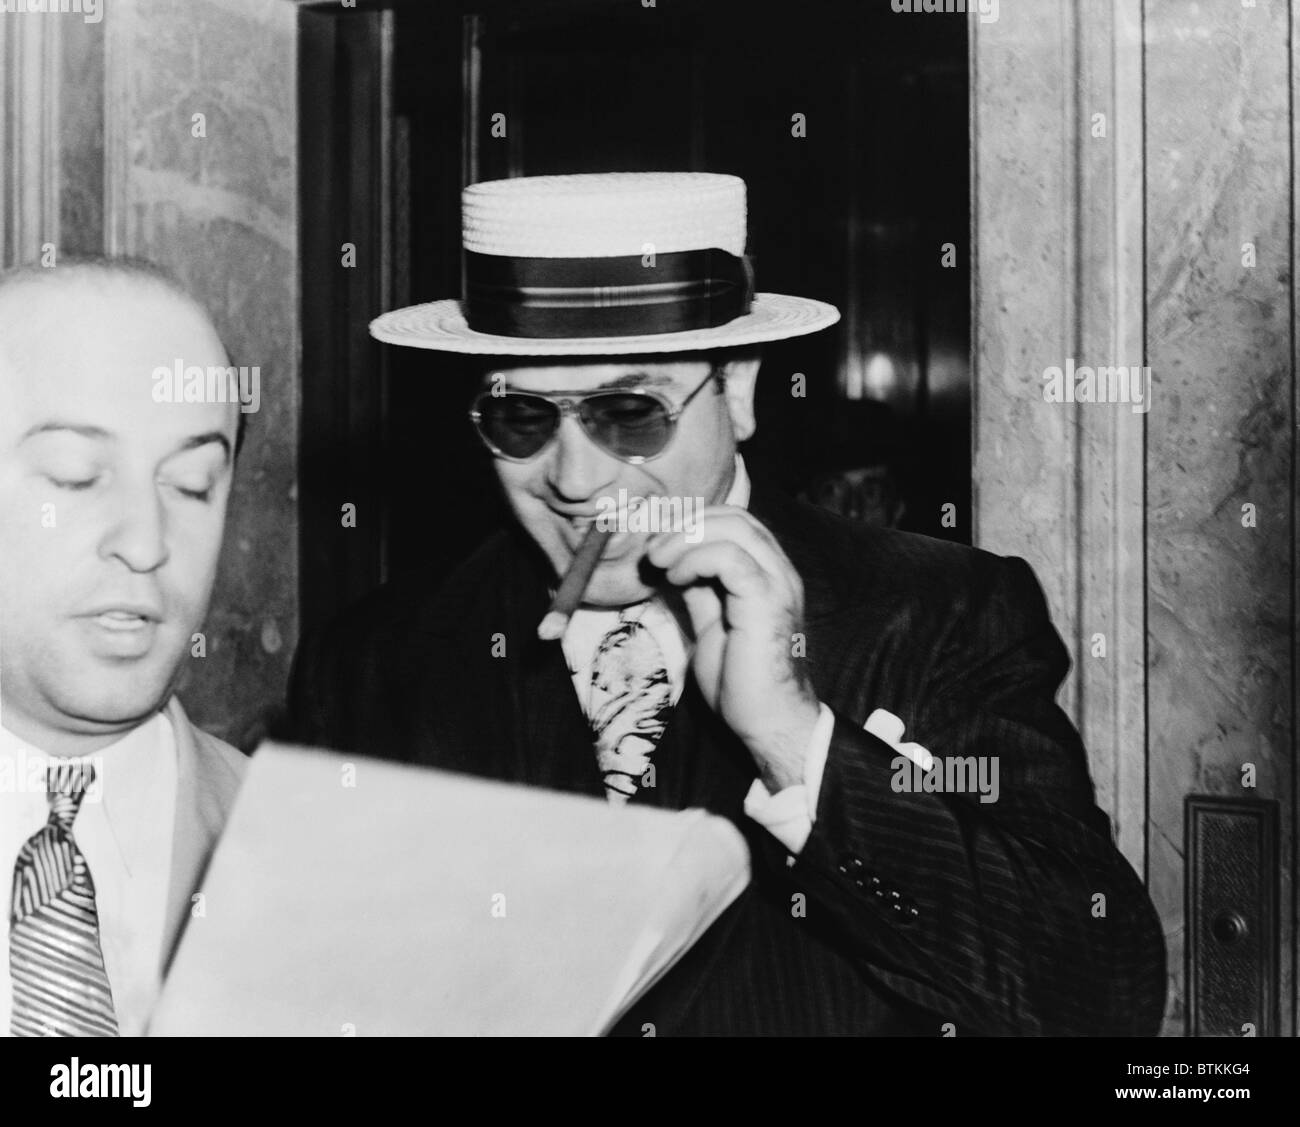 Al Capone, with a cigar and a big smile, leaving Federal building in Miami, Florida, preceded by his attorney Abe Teitelbaum. 1941. Stock Photo